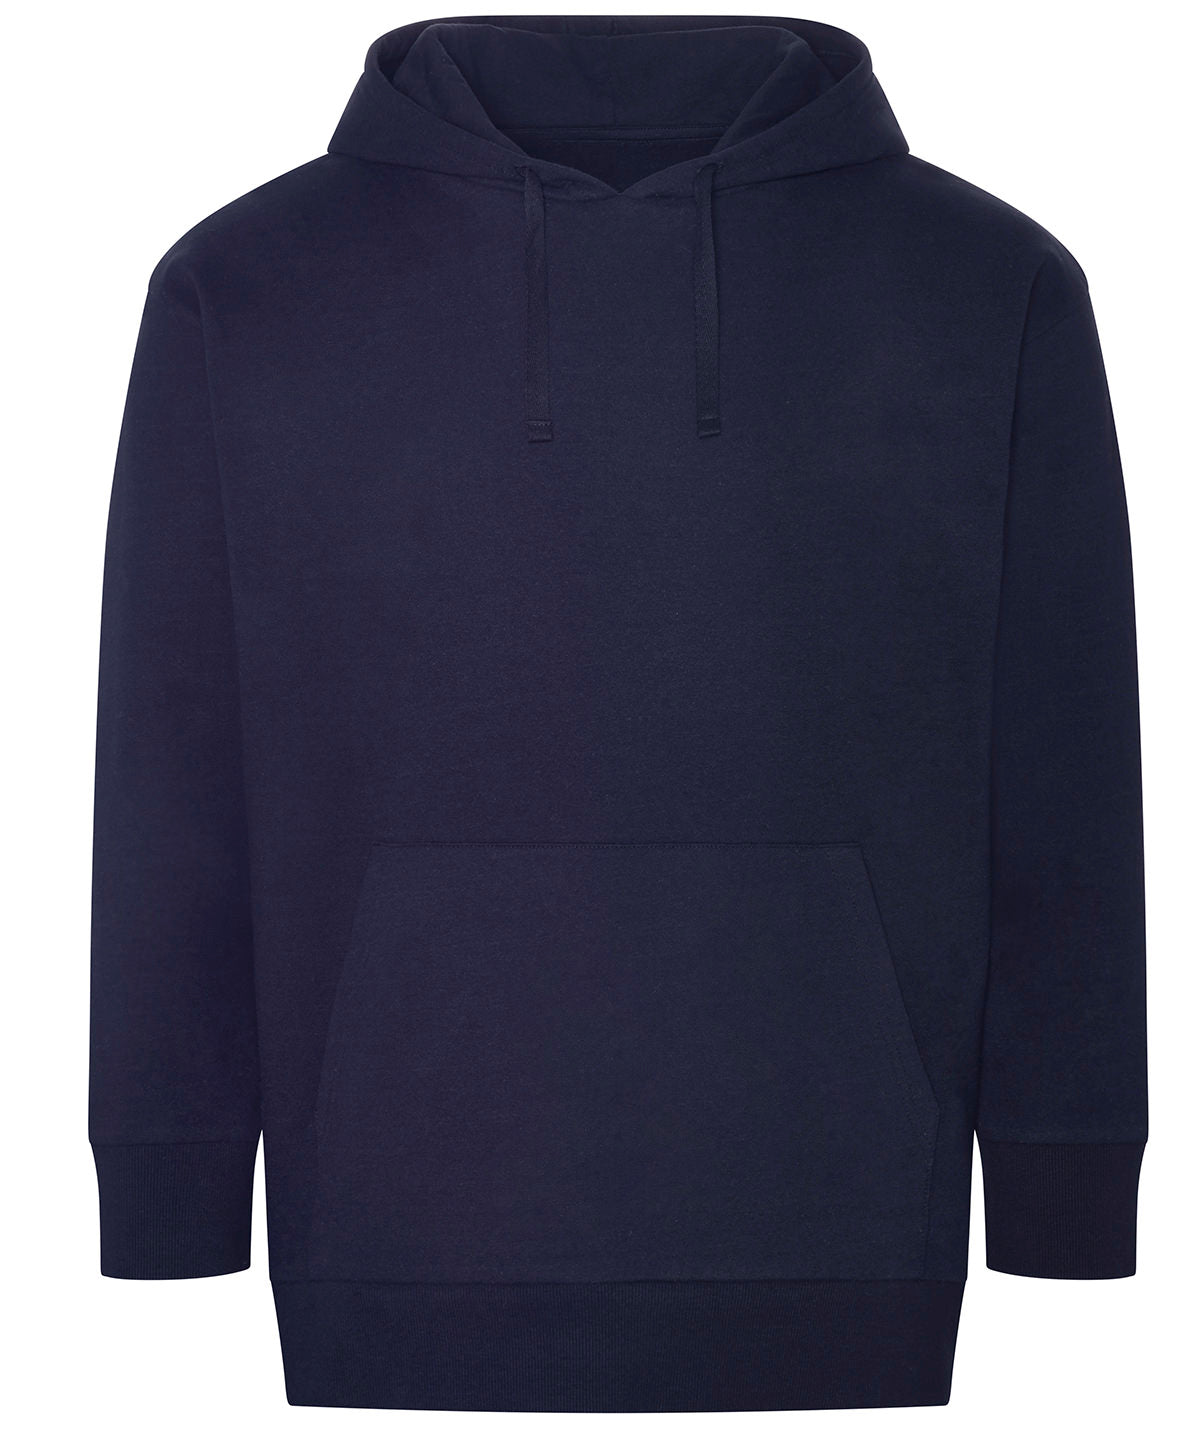 Crater recycled hoodie | Navy